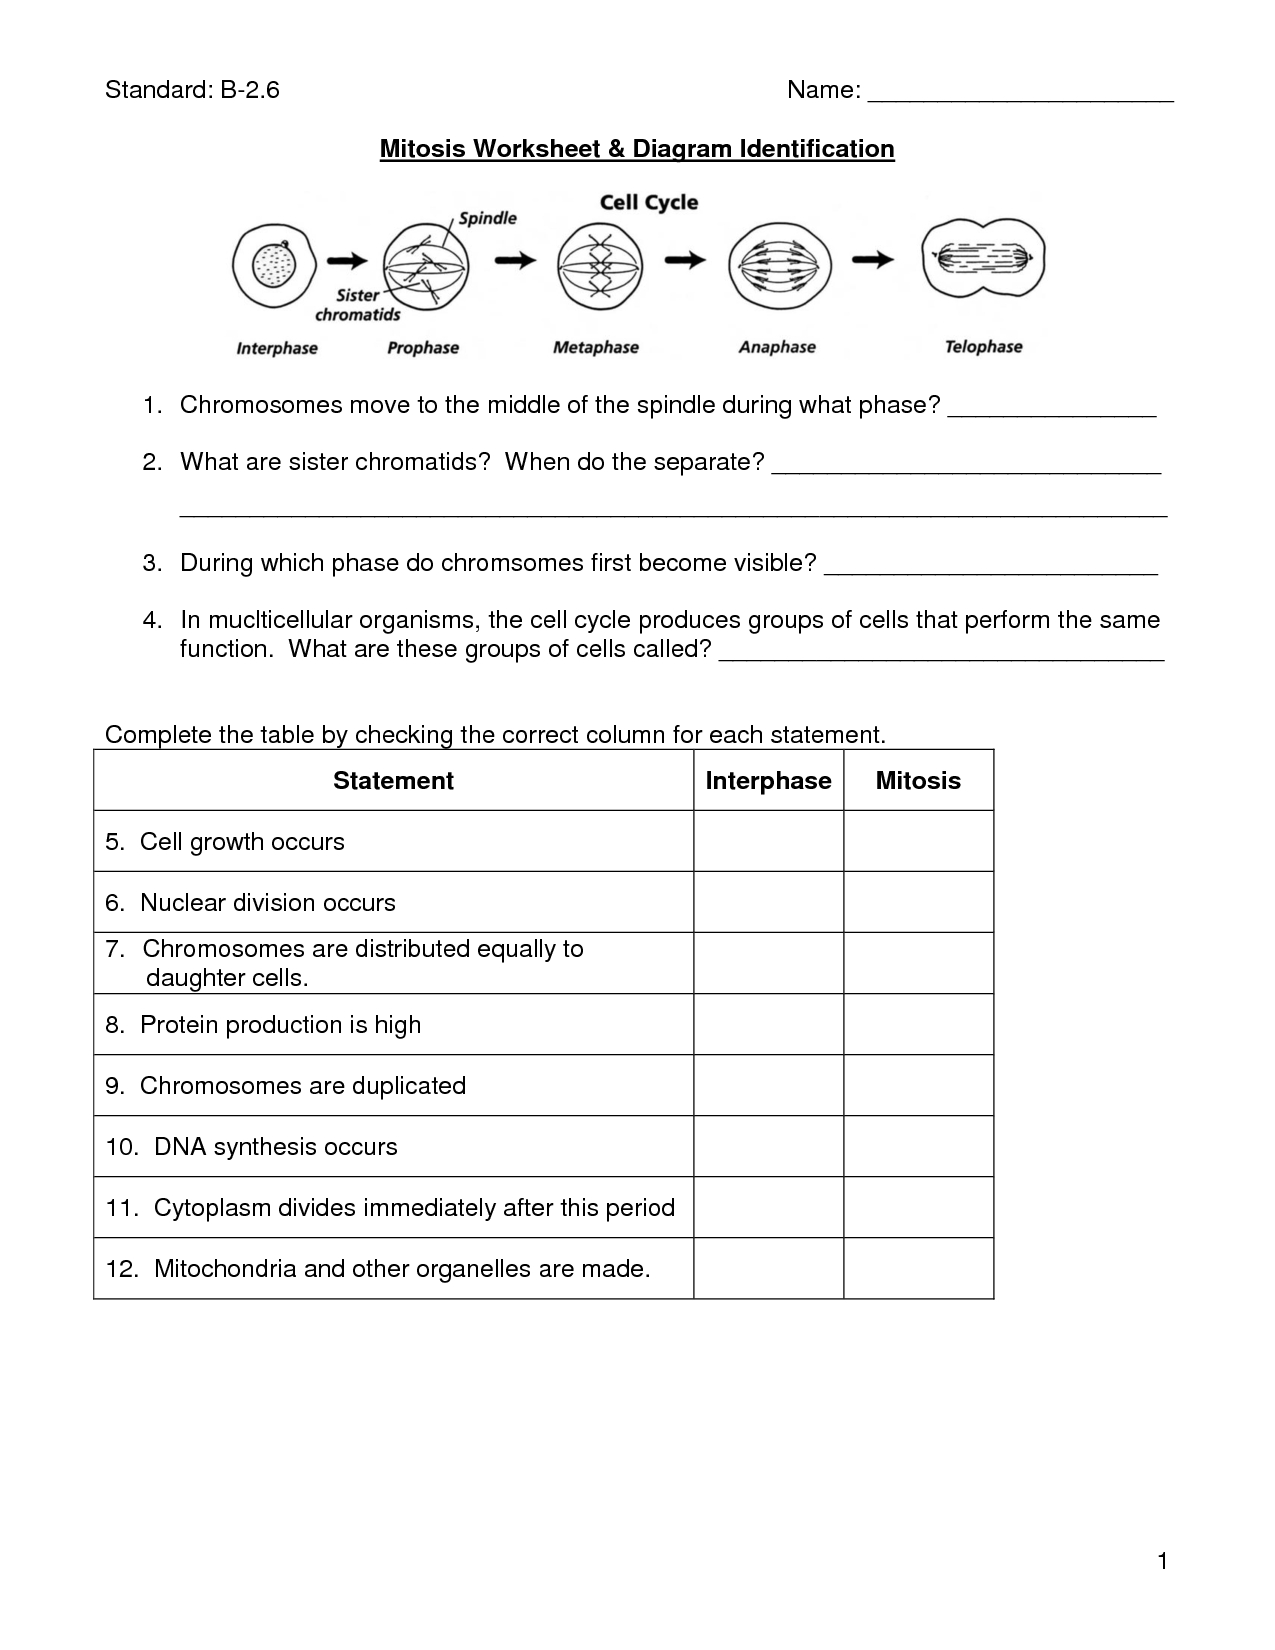 Mitosis Worksheet | Cells, Photosynthesis, Mitosis | Biology Lessons | Free Printable Biology Worksheets For High School